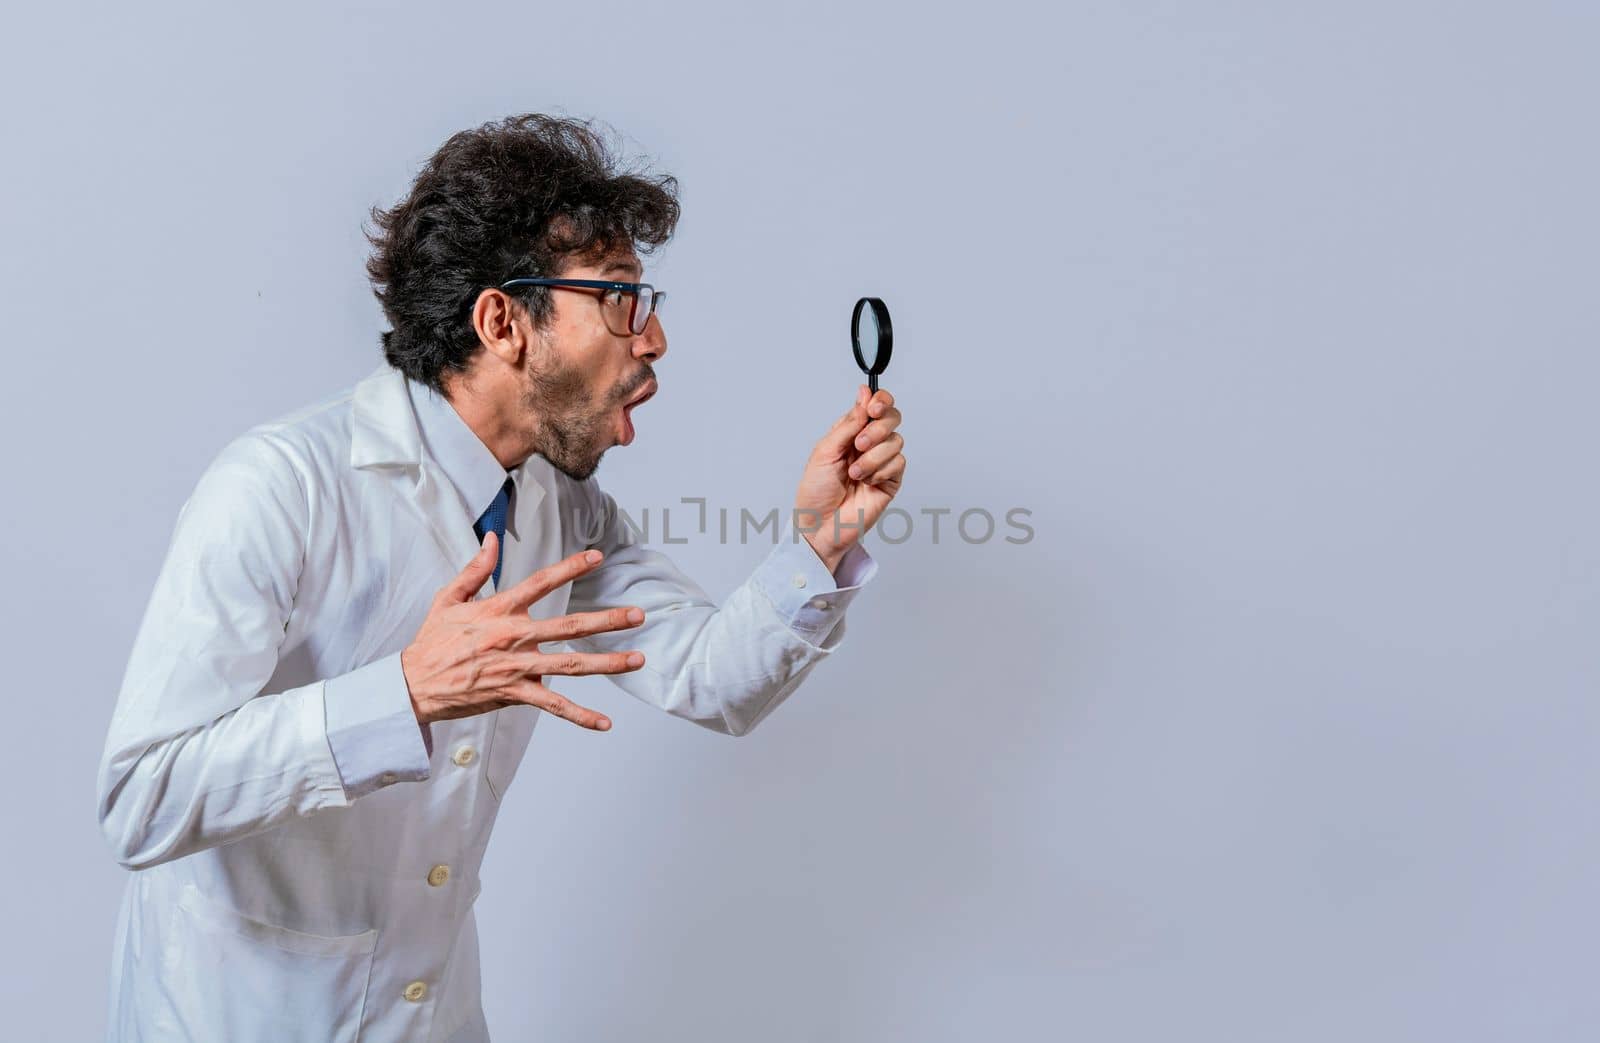 Scientist holding a magnifying glass looking to the side, Man in a white coat with a magnifying glass looking advertisement, Surprised scientist observing with a magnifying glass to the side